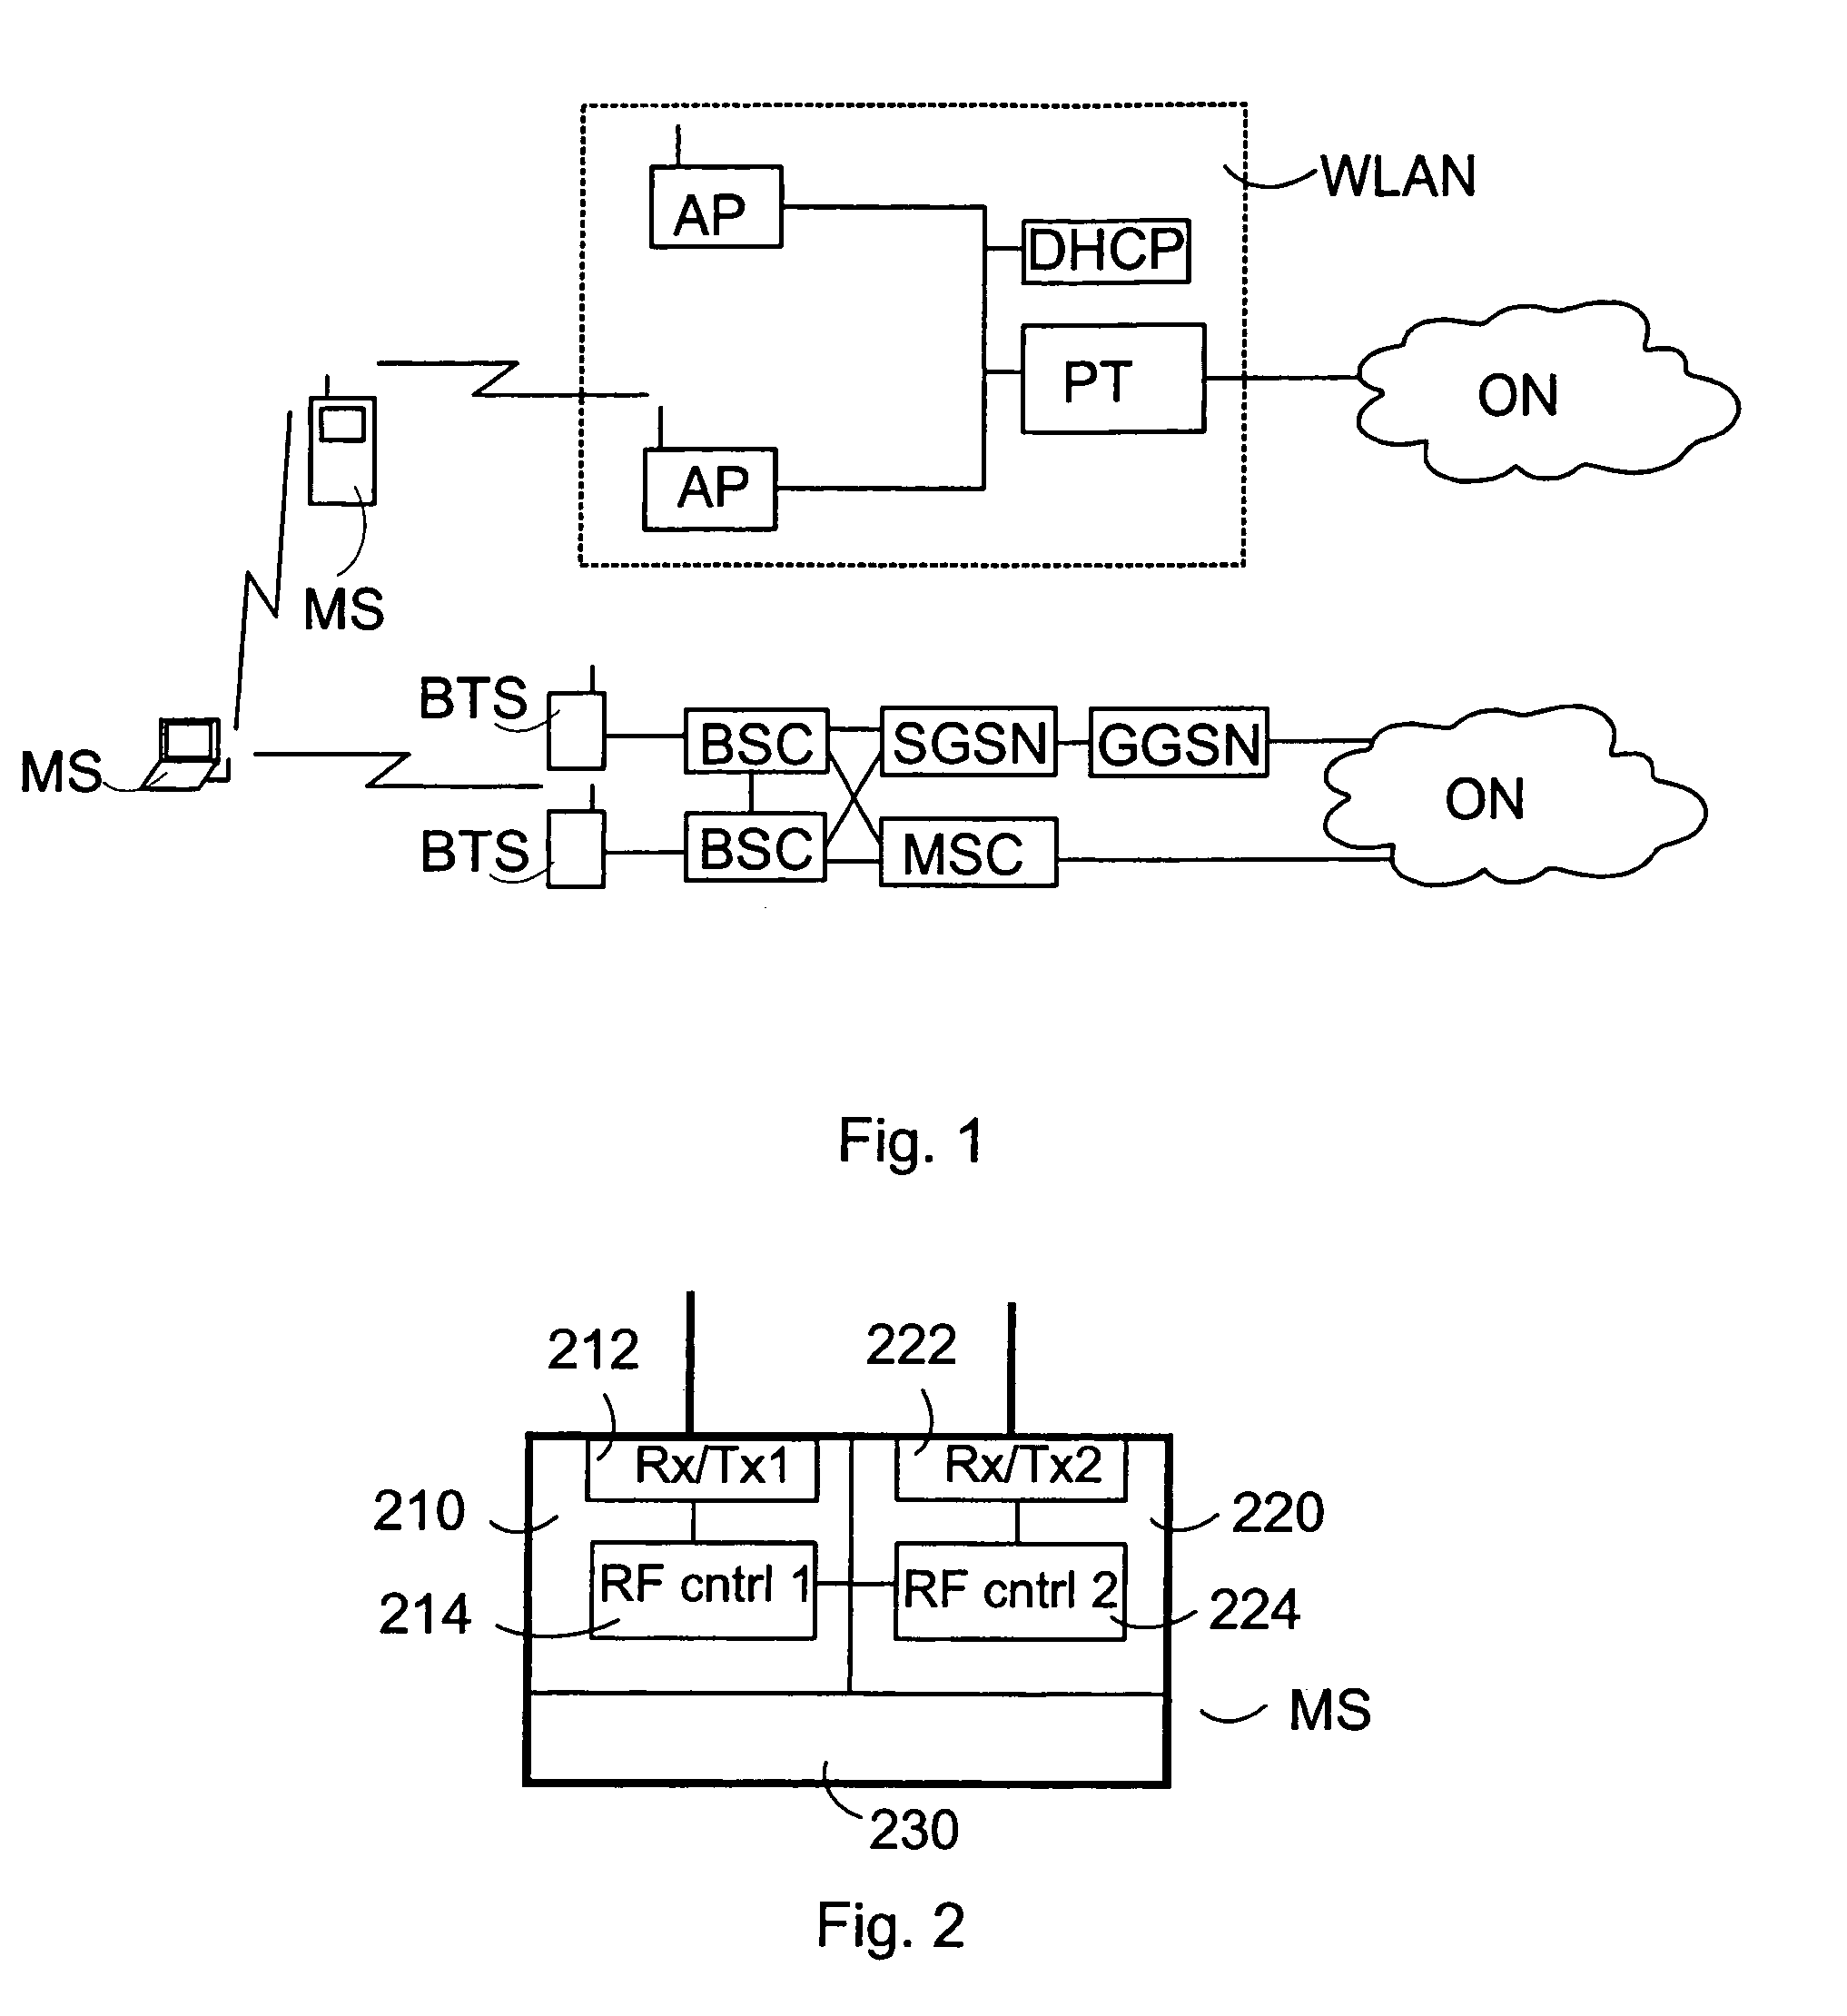 Channel selection in wireless telecommunication system